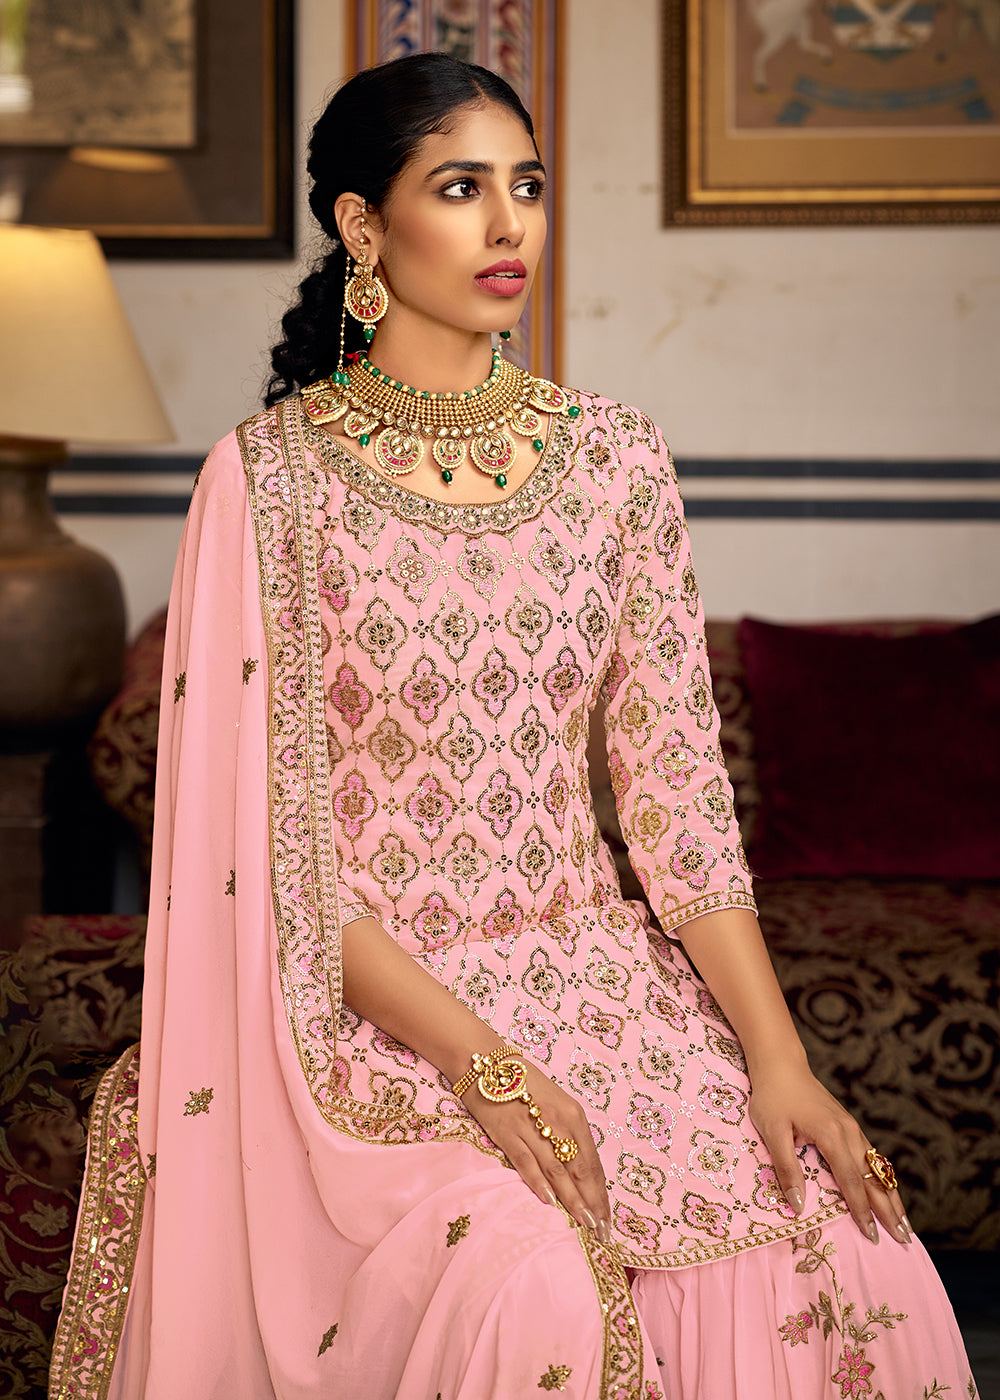 Shop Now Heavy Georgette Pink Sequins Embroidered Gharara Suit Online at Empress Clothing in USA, UK, Canada, Italy & Worldwide.